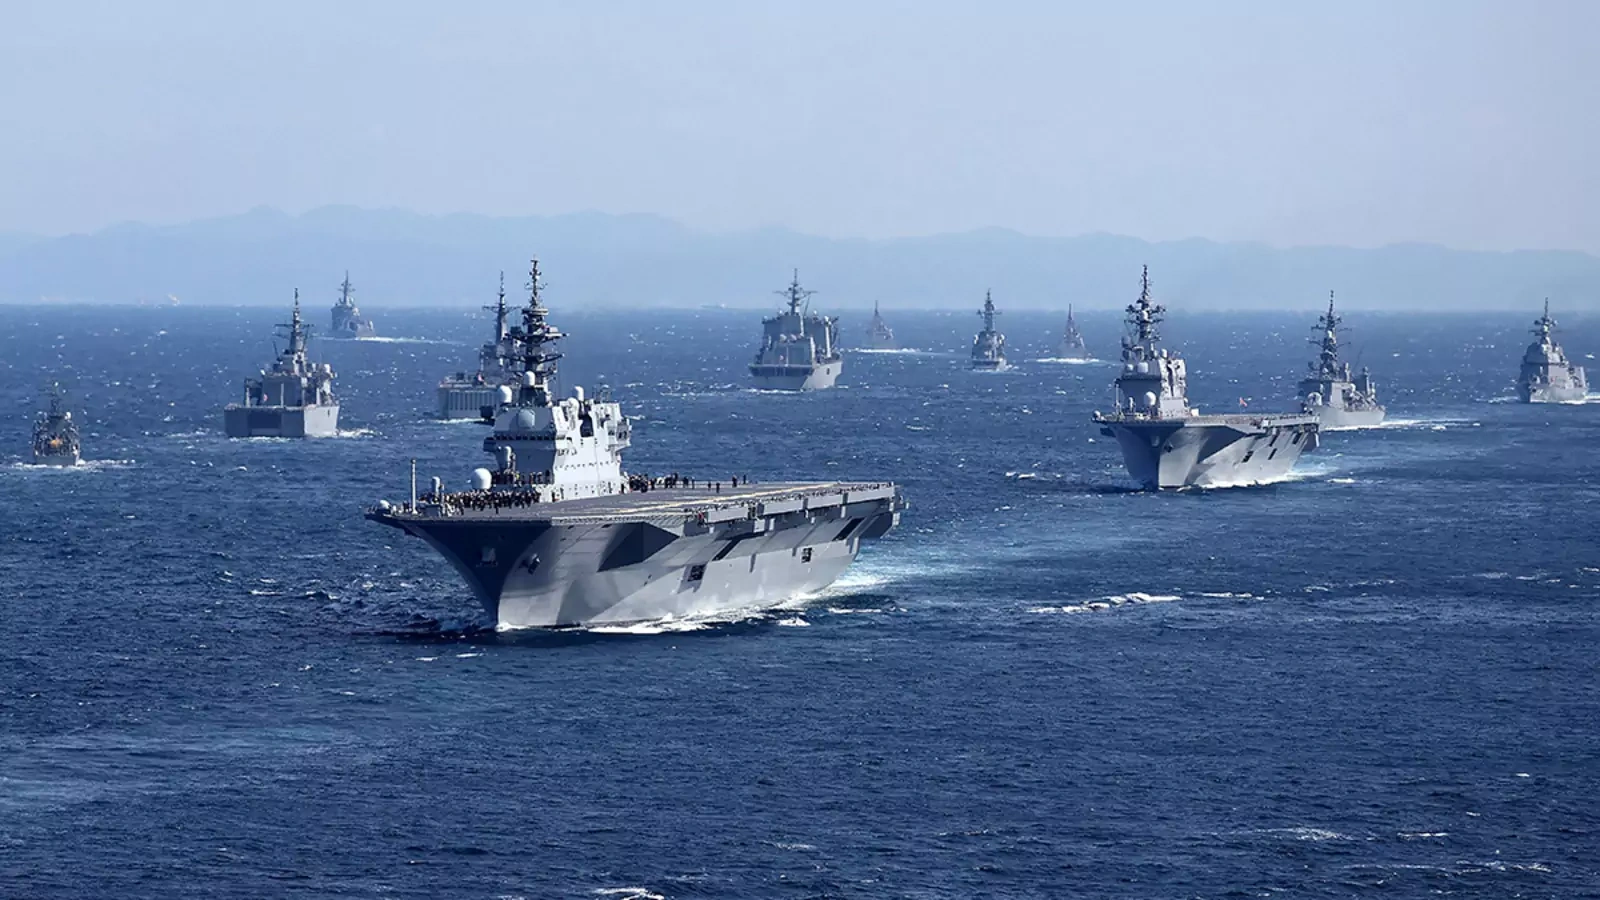 Military vessels from Japan and other countries sail in Sagami Bay during the International Fleet Review, held by Japan’s Maritime Self-Defense Force.